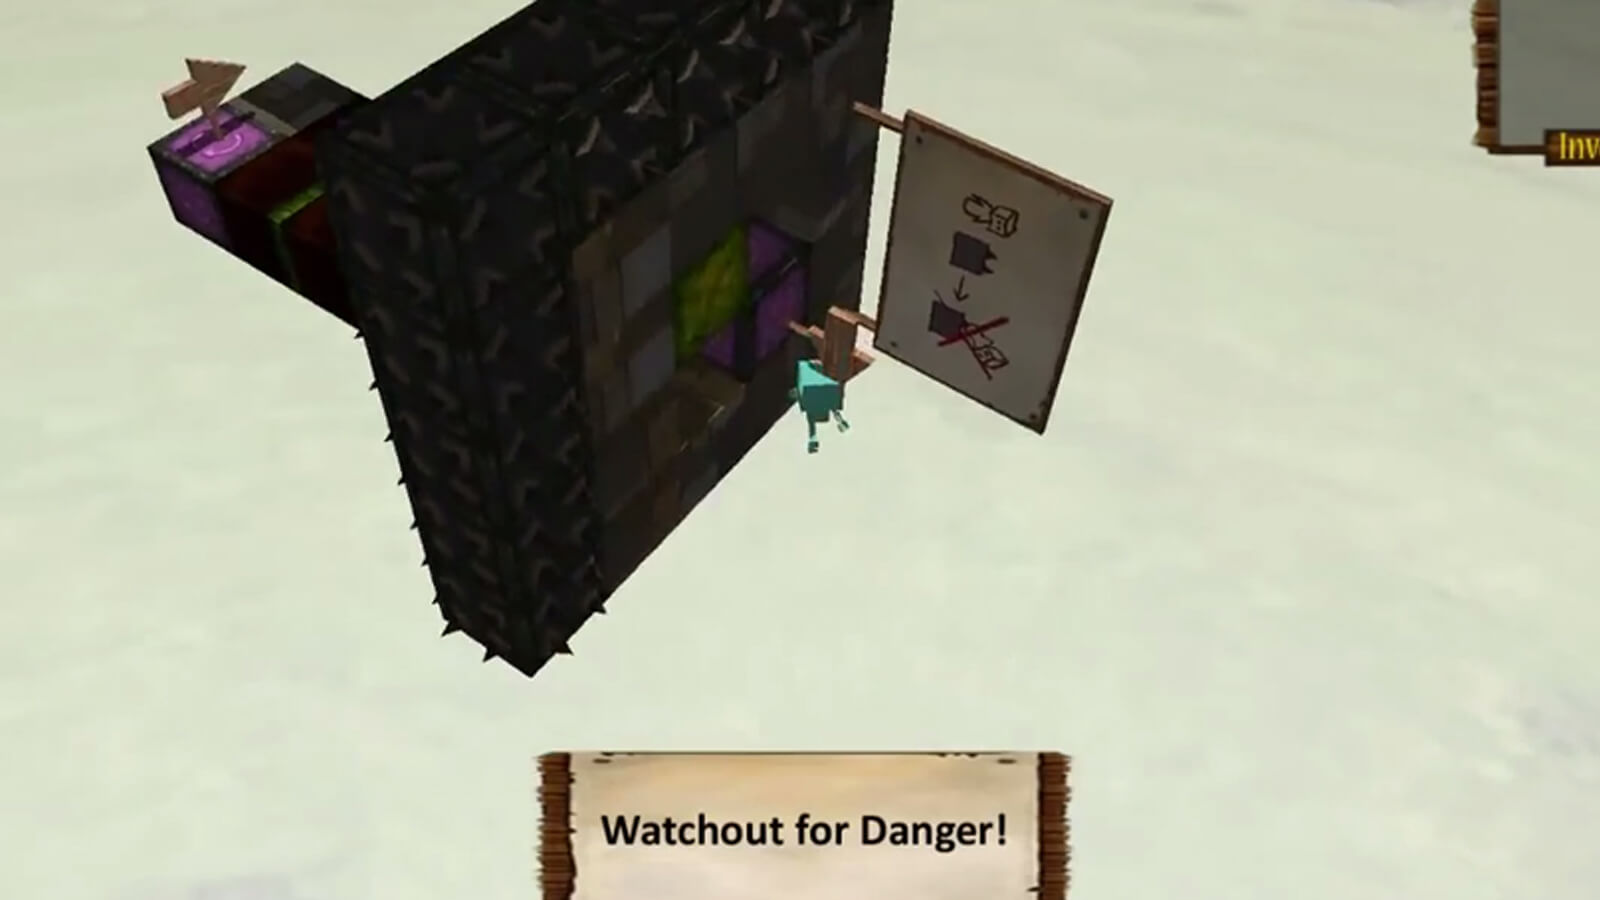 The floating platform flips, dropping the player into the void. "Watchout for Danger!" appears on screen.